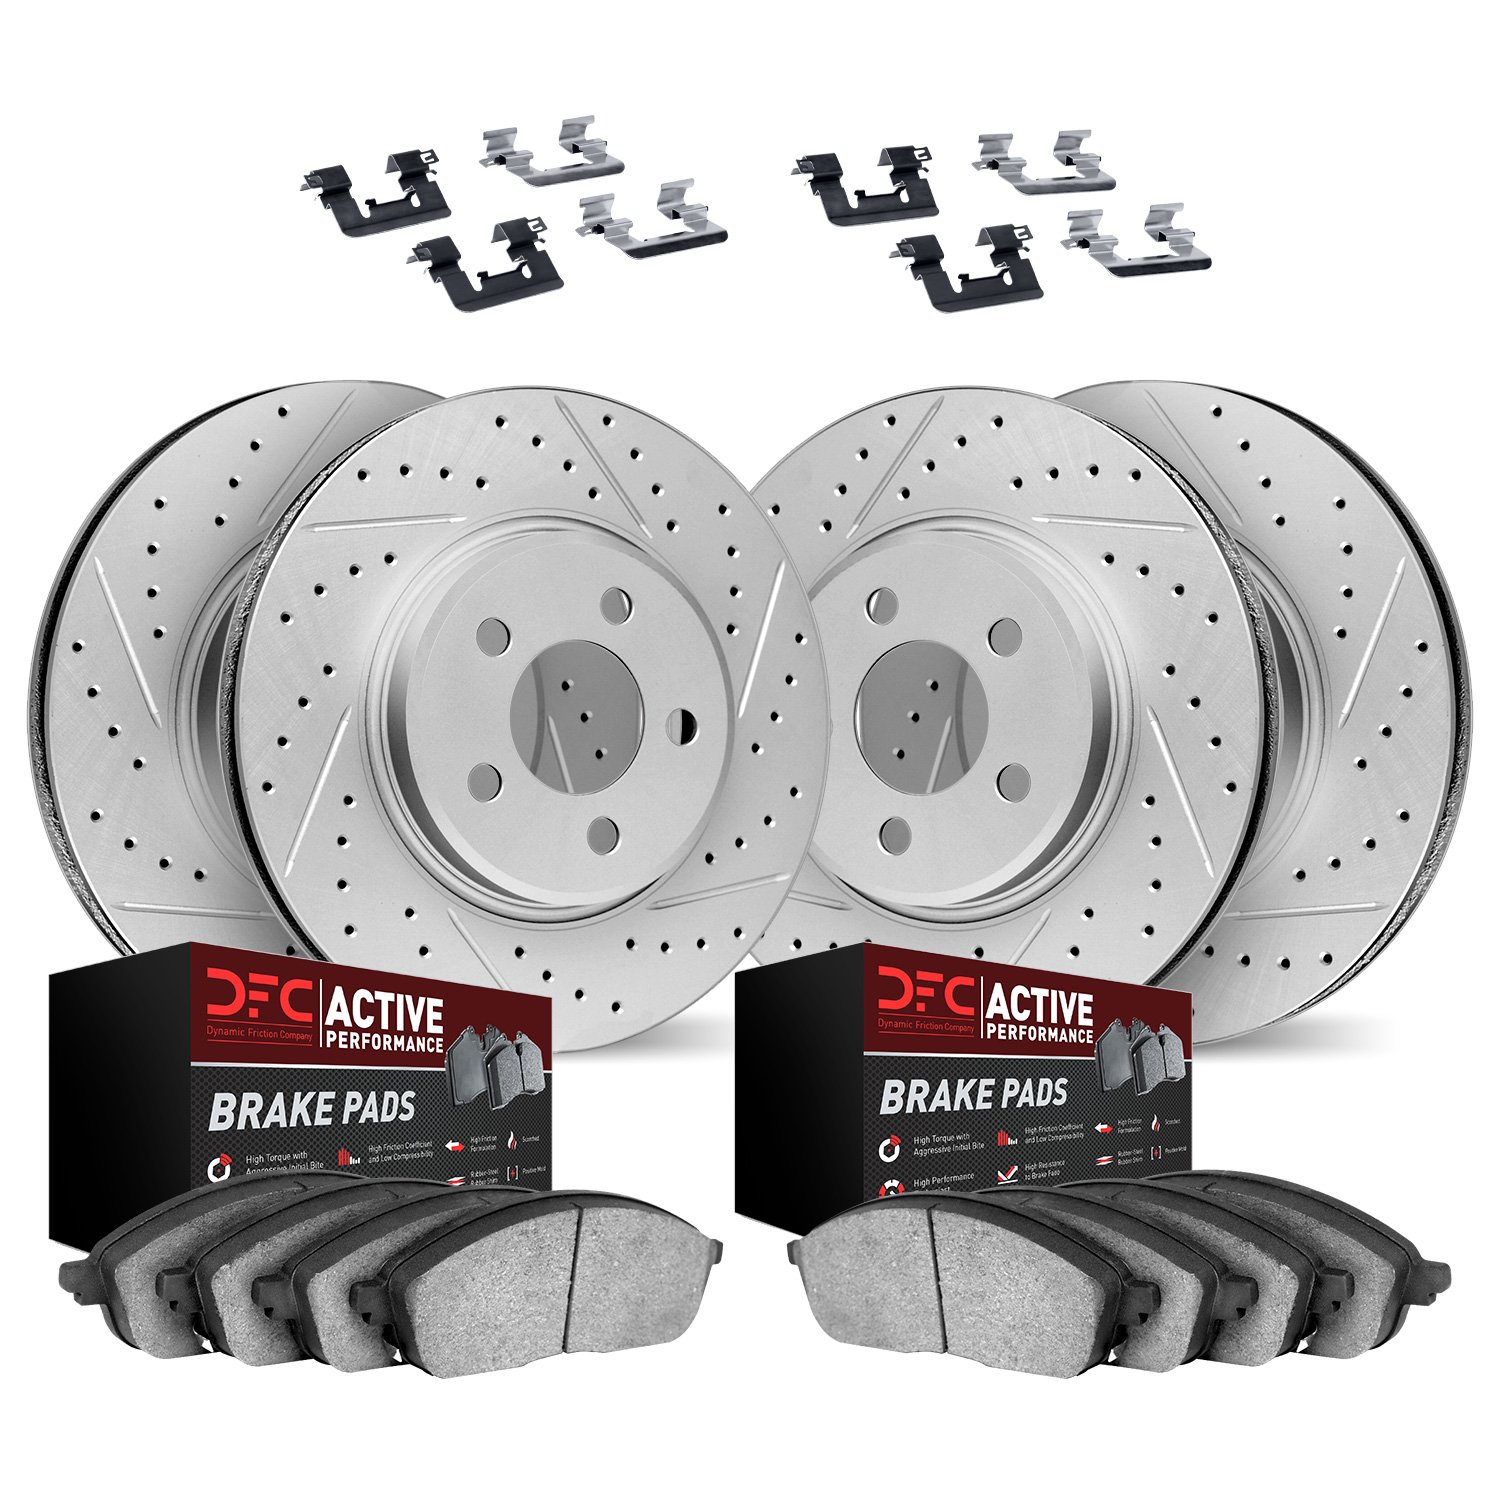 2714-80015 Geoperformance Drilled/Slotted Brake Rotors with Active Performance Pads Kit & Hardware, 2004-2008 Ford/Lincoln/Mercu